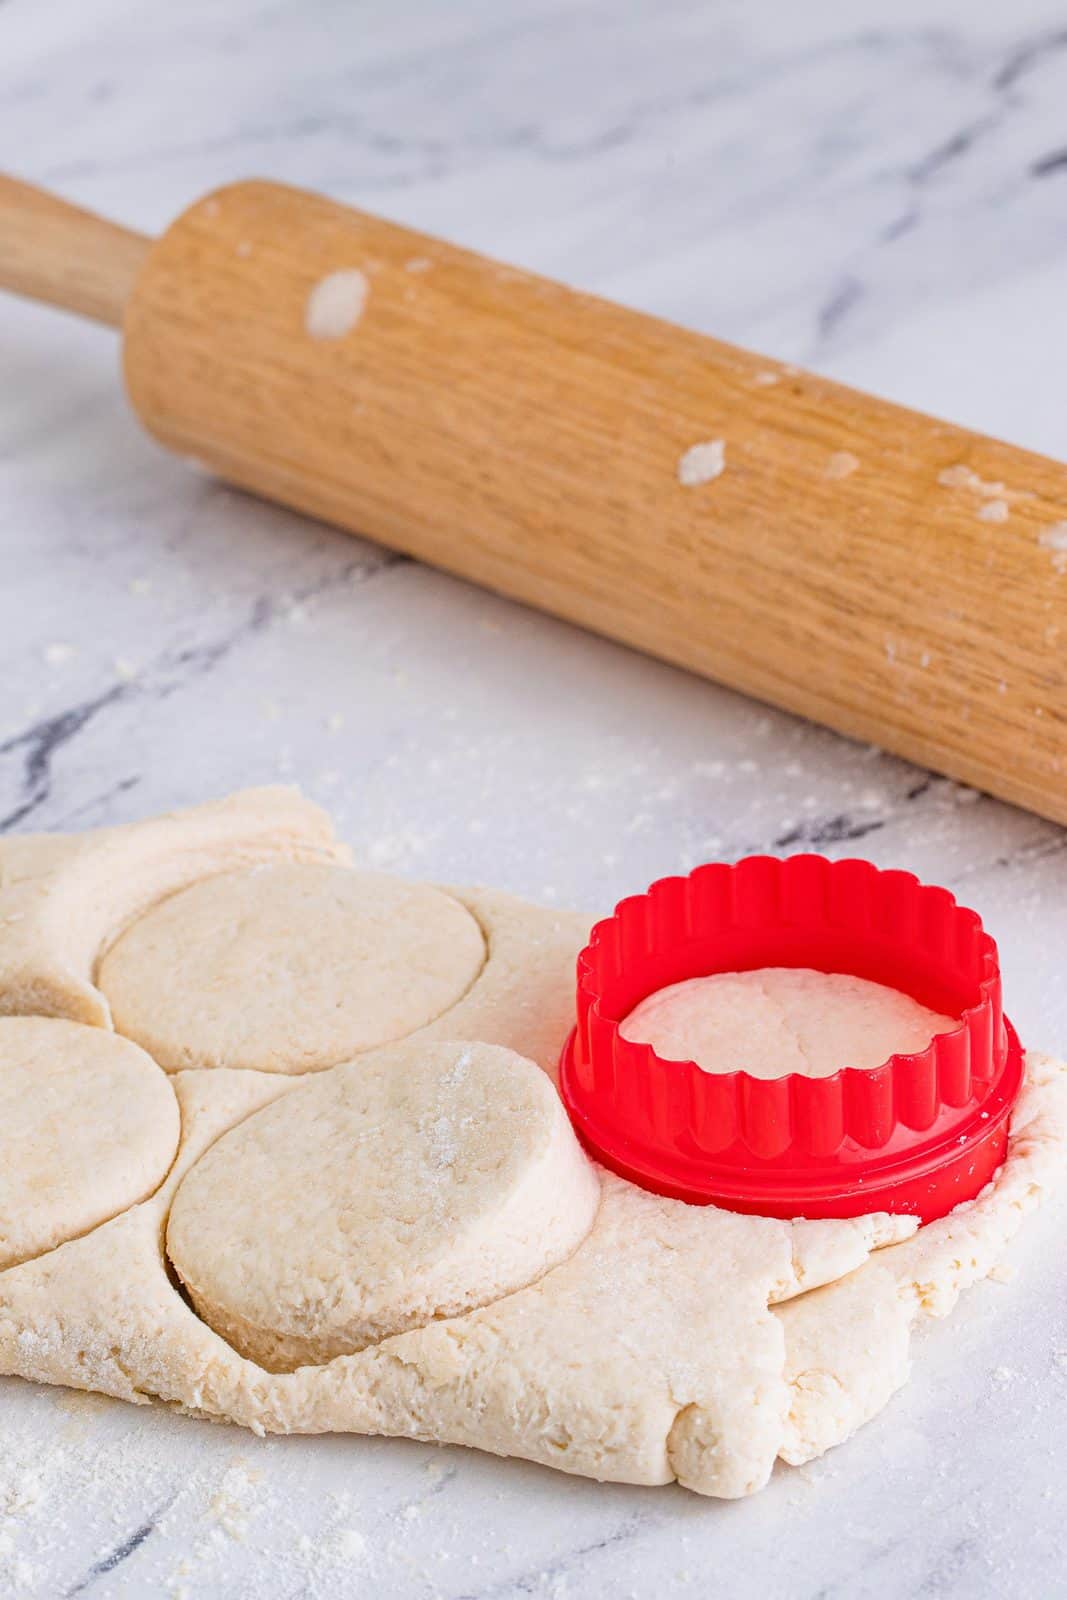 Biscuits being cut out with a biscuit cutter.